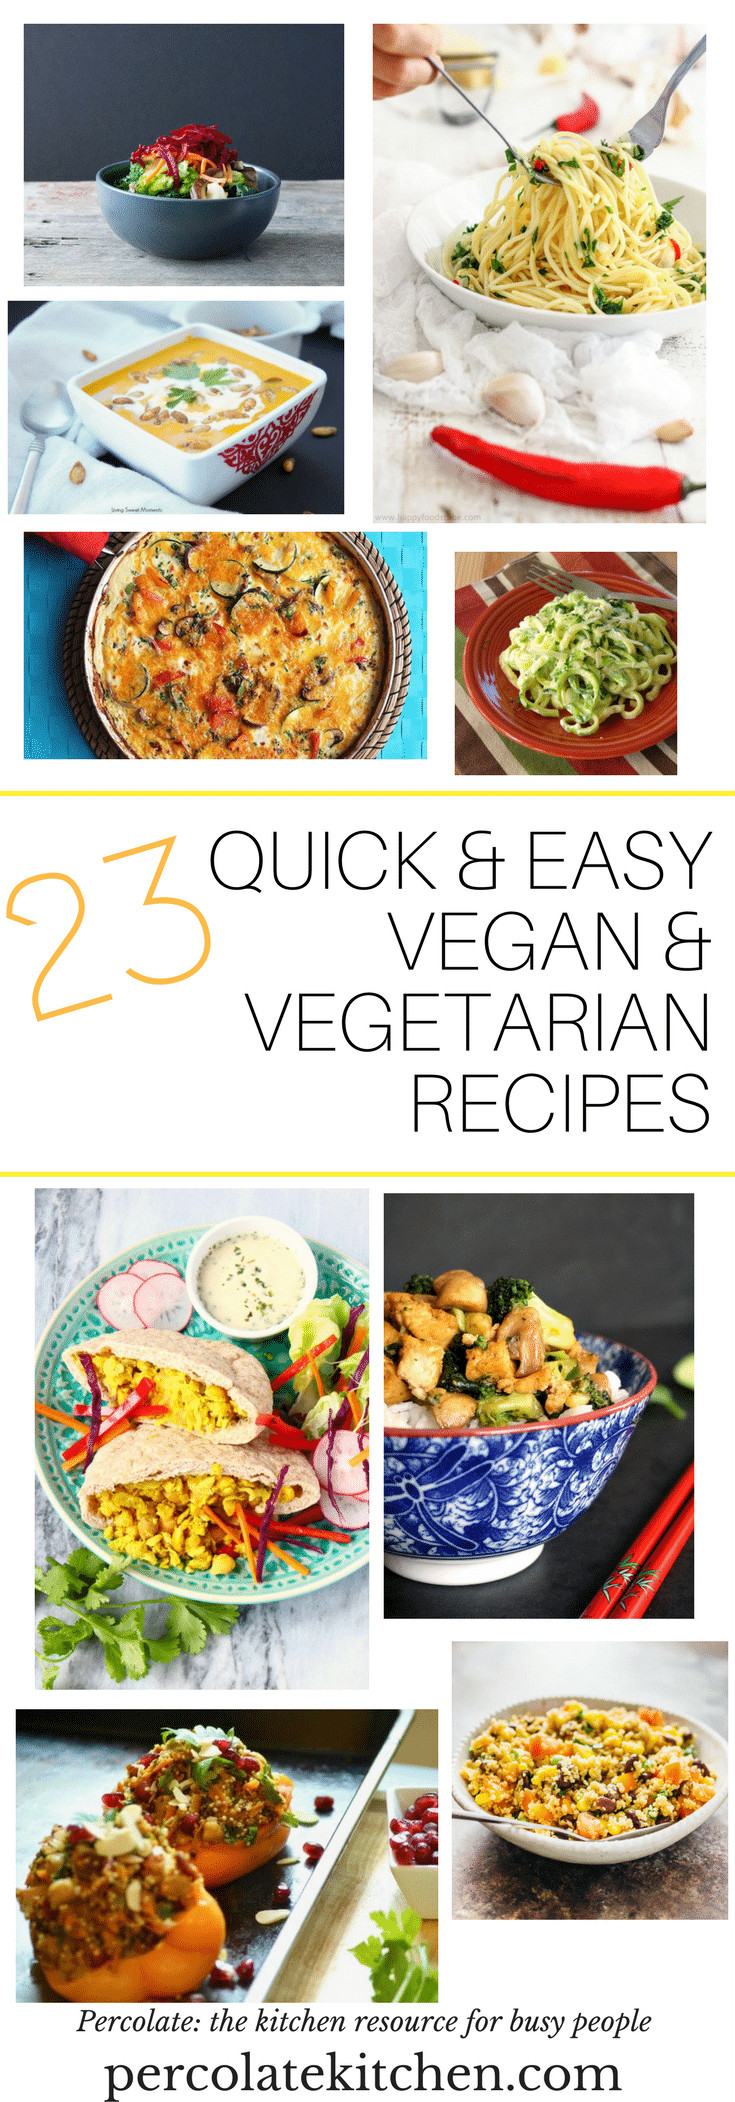 Quick And Easy Vegetarian Recipes
 23 Quick and Easy Vegan and Ve arian Recipes